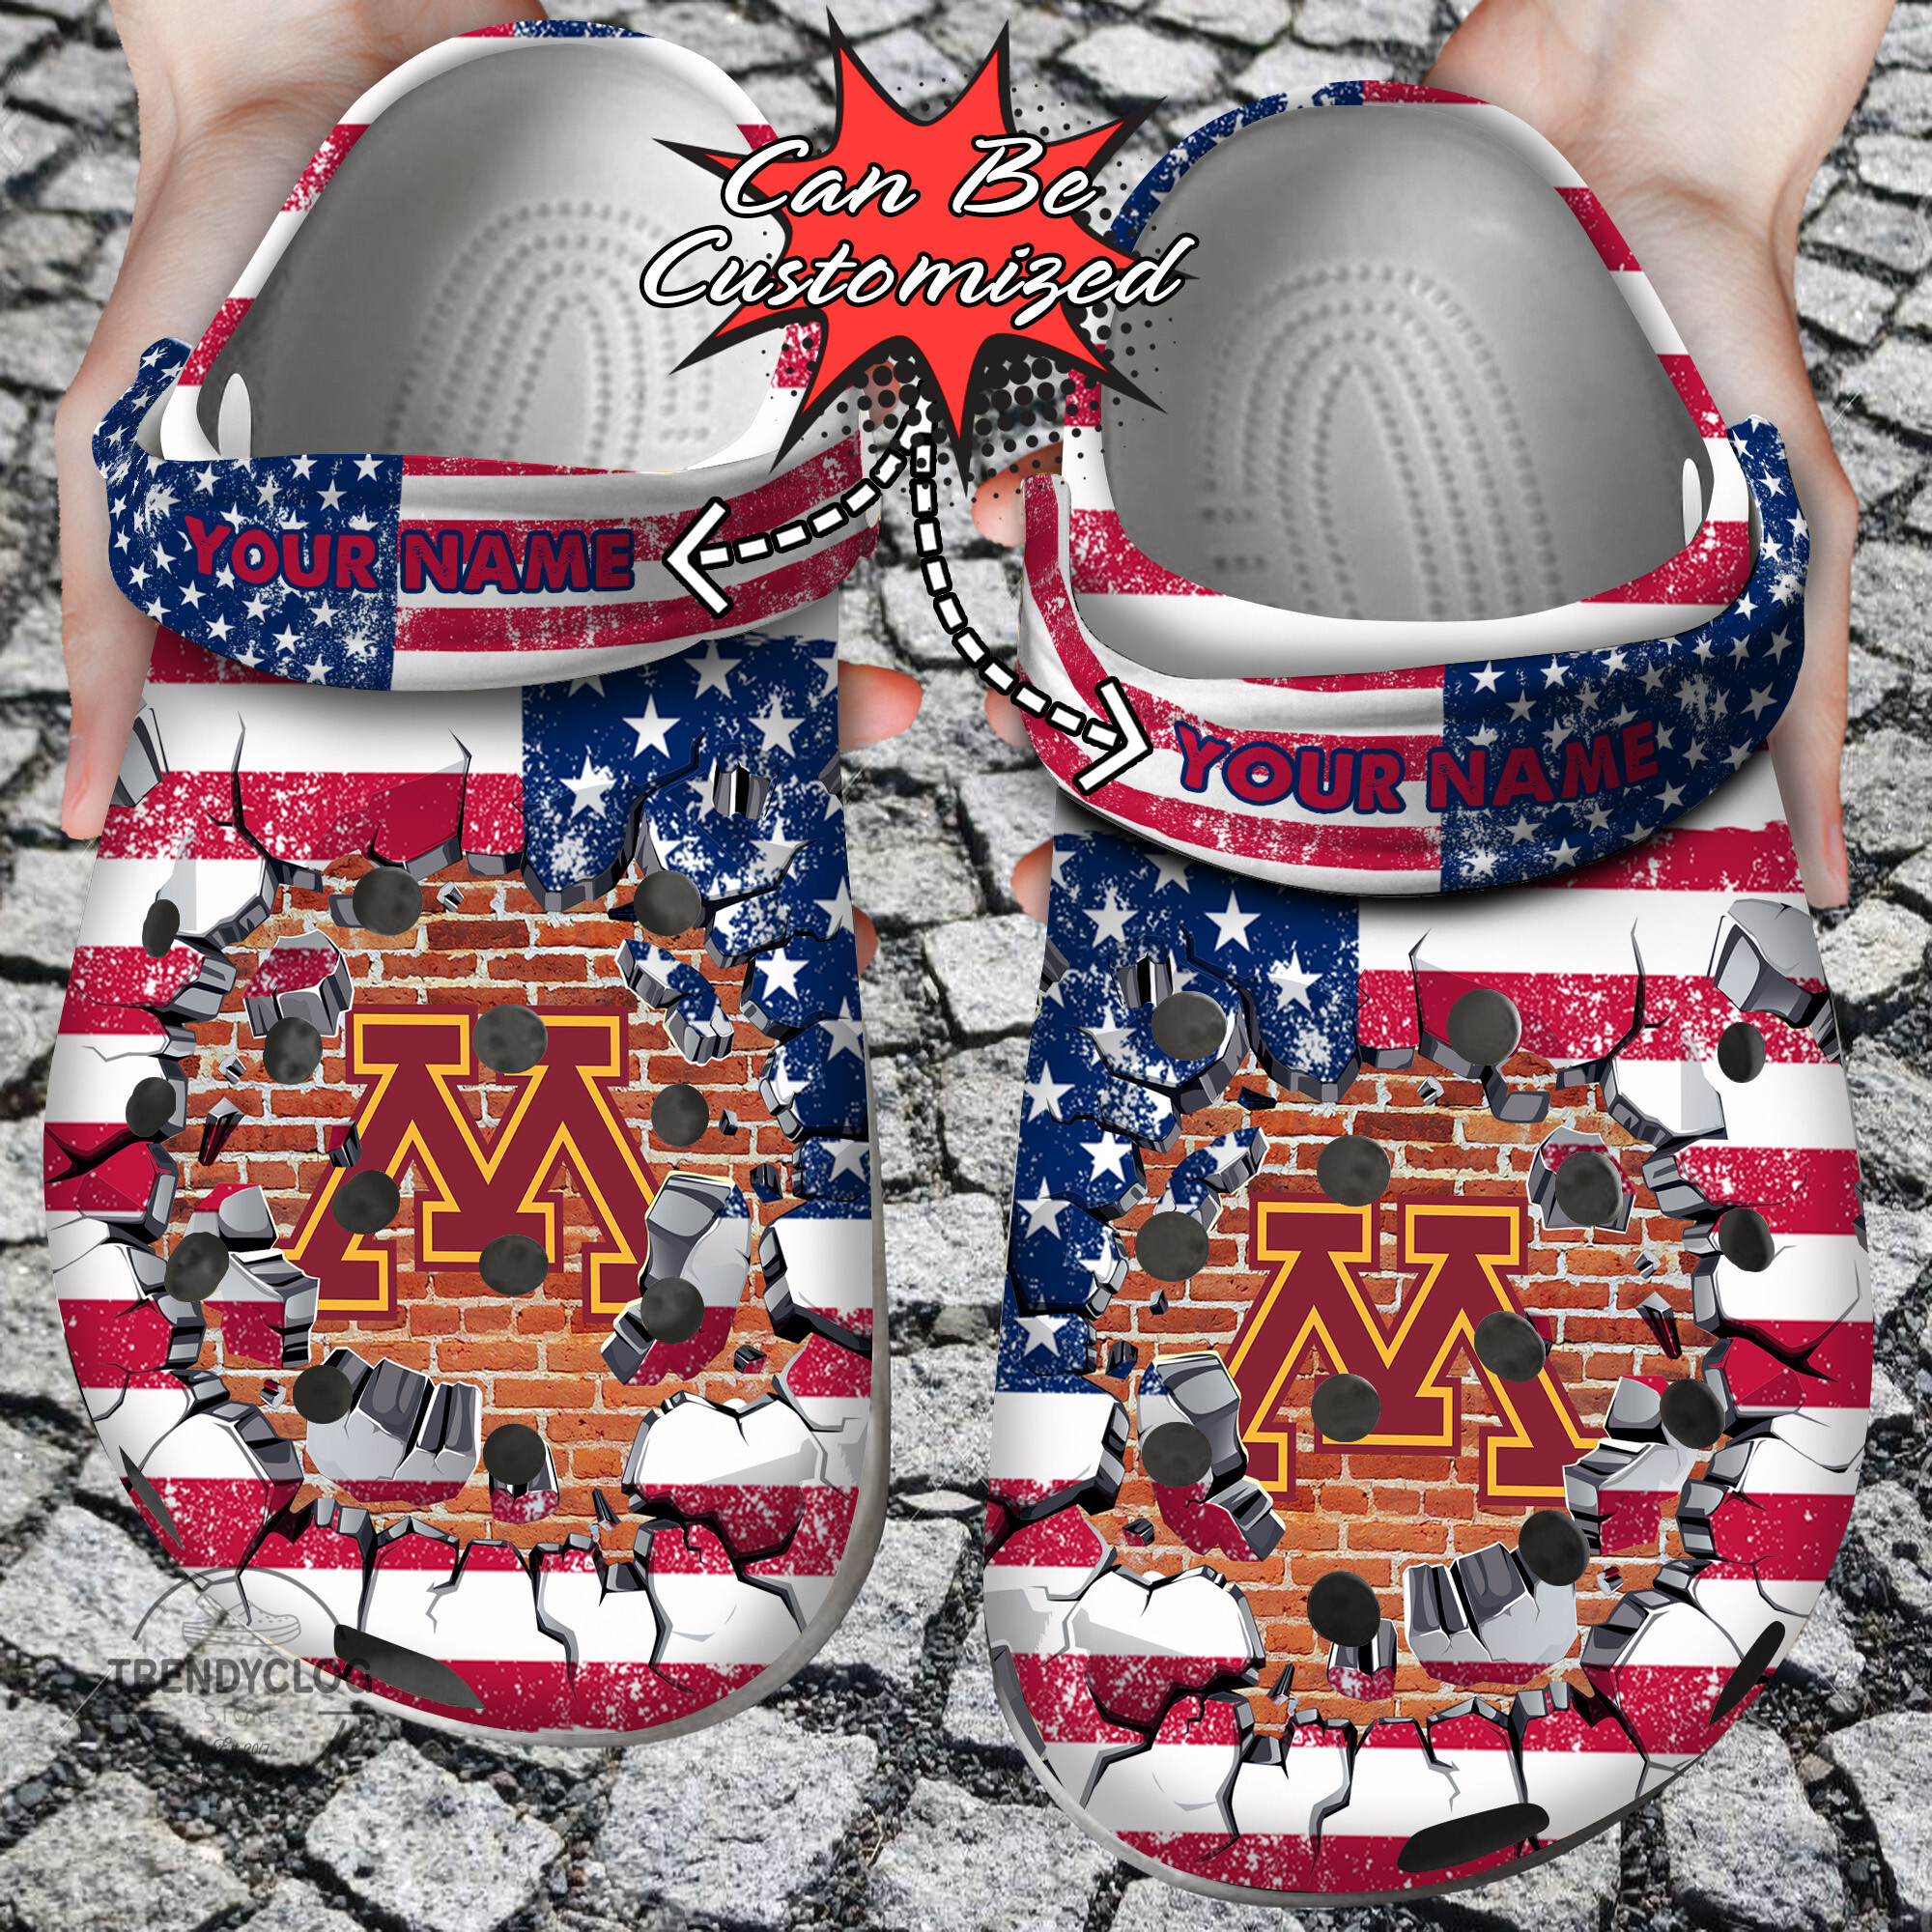 Sport Crocs Personalized MGolden Gophers University American Flag New Clog Shoes